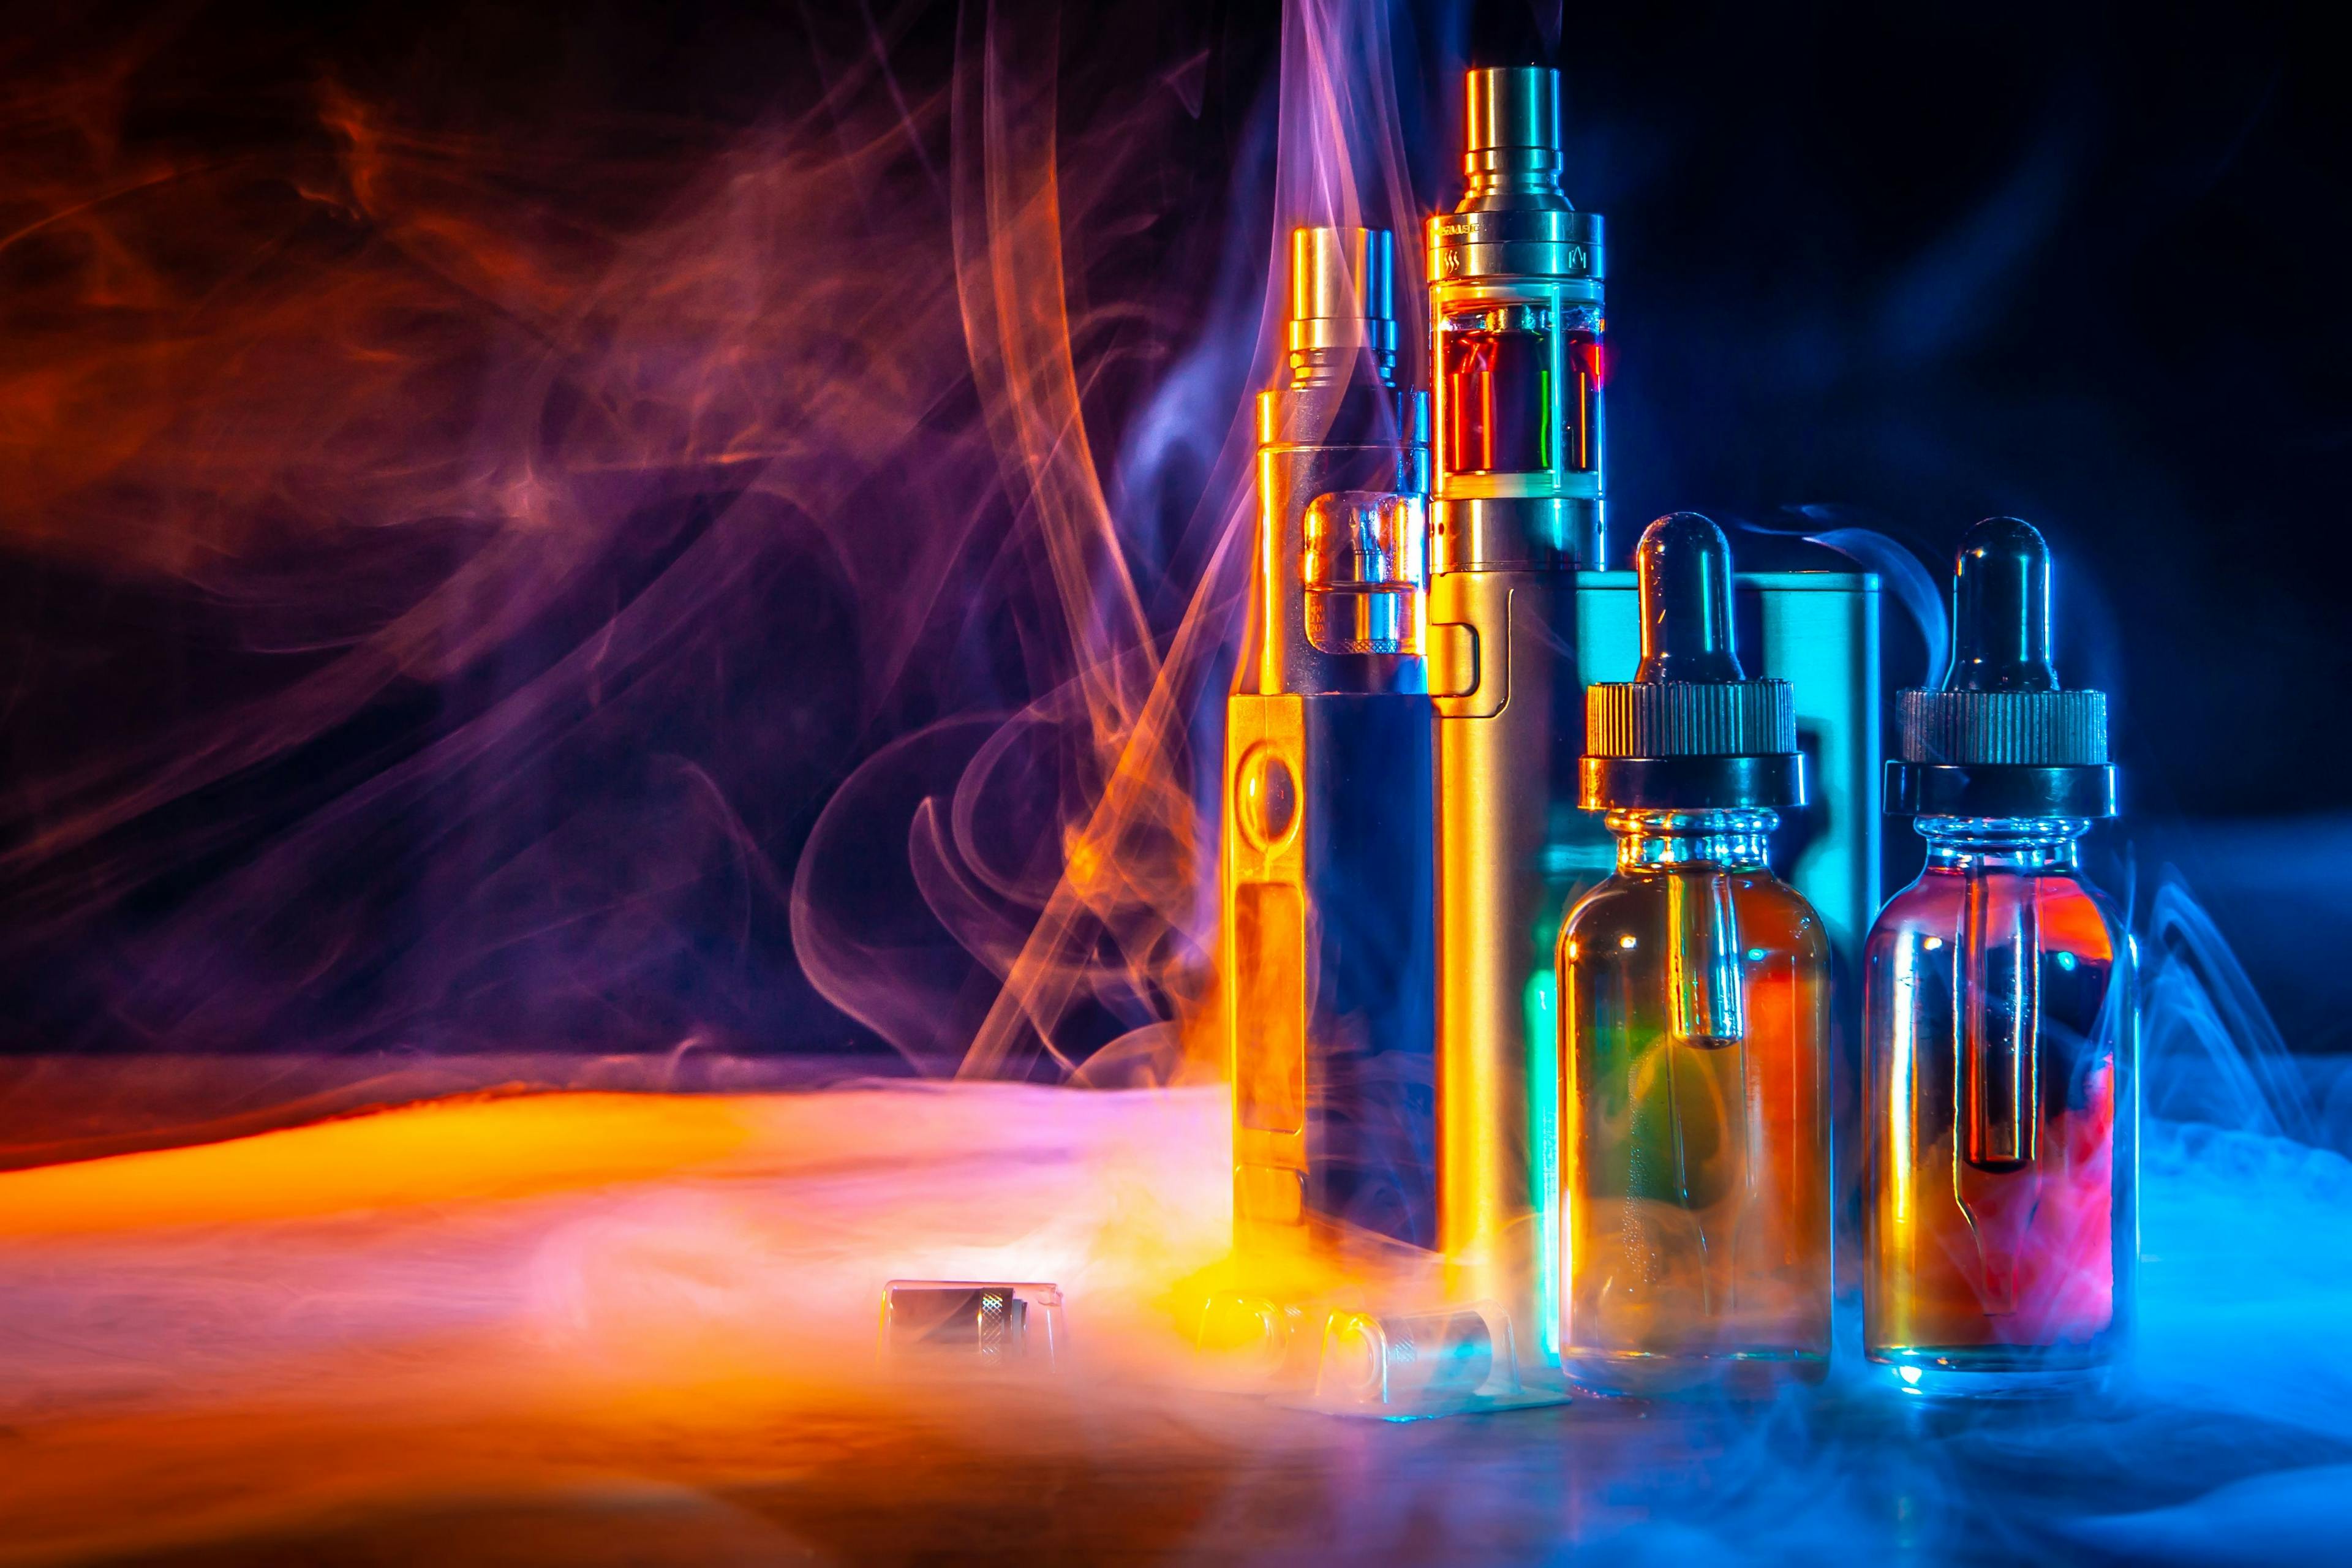 Development of a “Freeze-Pour” Sample Preparation Method for the GC Analysis of Semivolatile Flavouring Chemicals Present in E-cigarette Refill Liquids